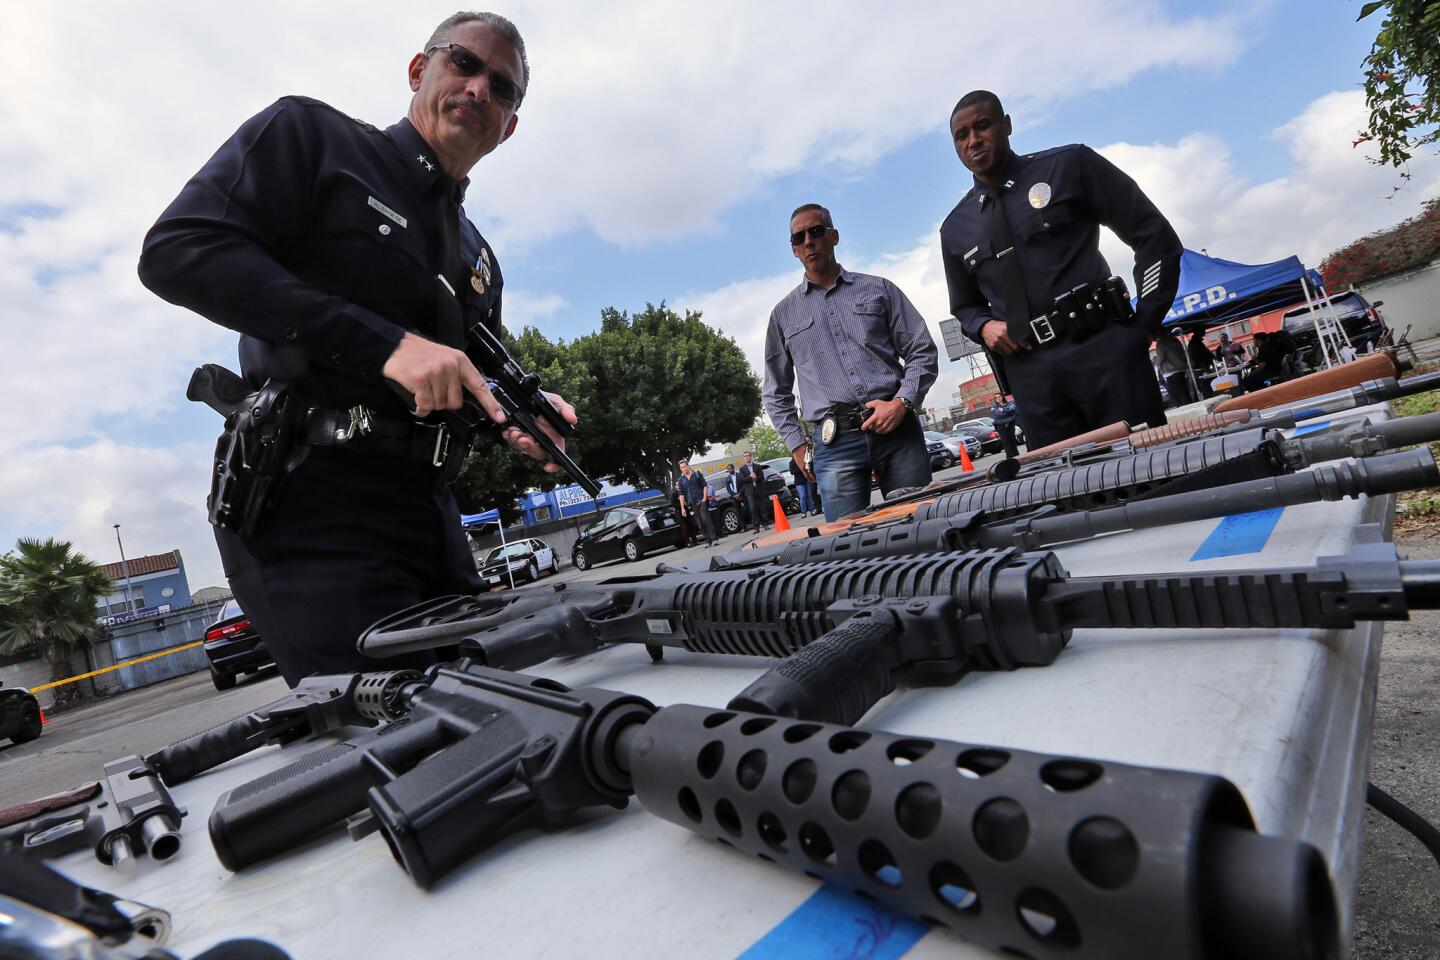 Deputy Chief Kirk J. Albanese checks out a gun brought in as part of the city's gun buyback program Saturday morning. The gun buyback is part of Mayor Eric Garcetti's Gang Reduction and Youth Development Office. It took place at a parking lot at 2379 W. Washington Blvd. in West Los Angeles.